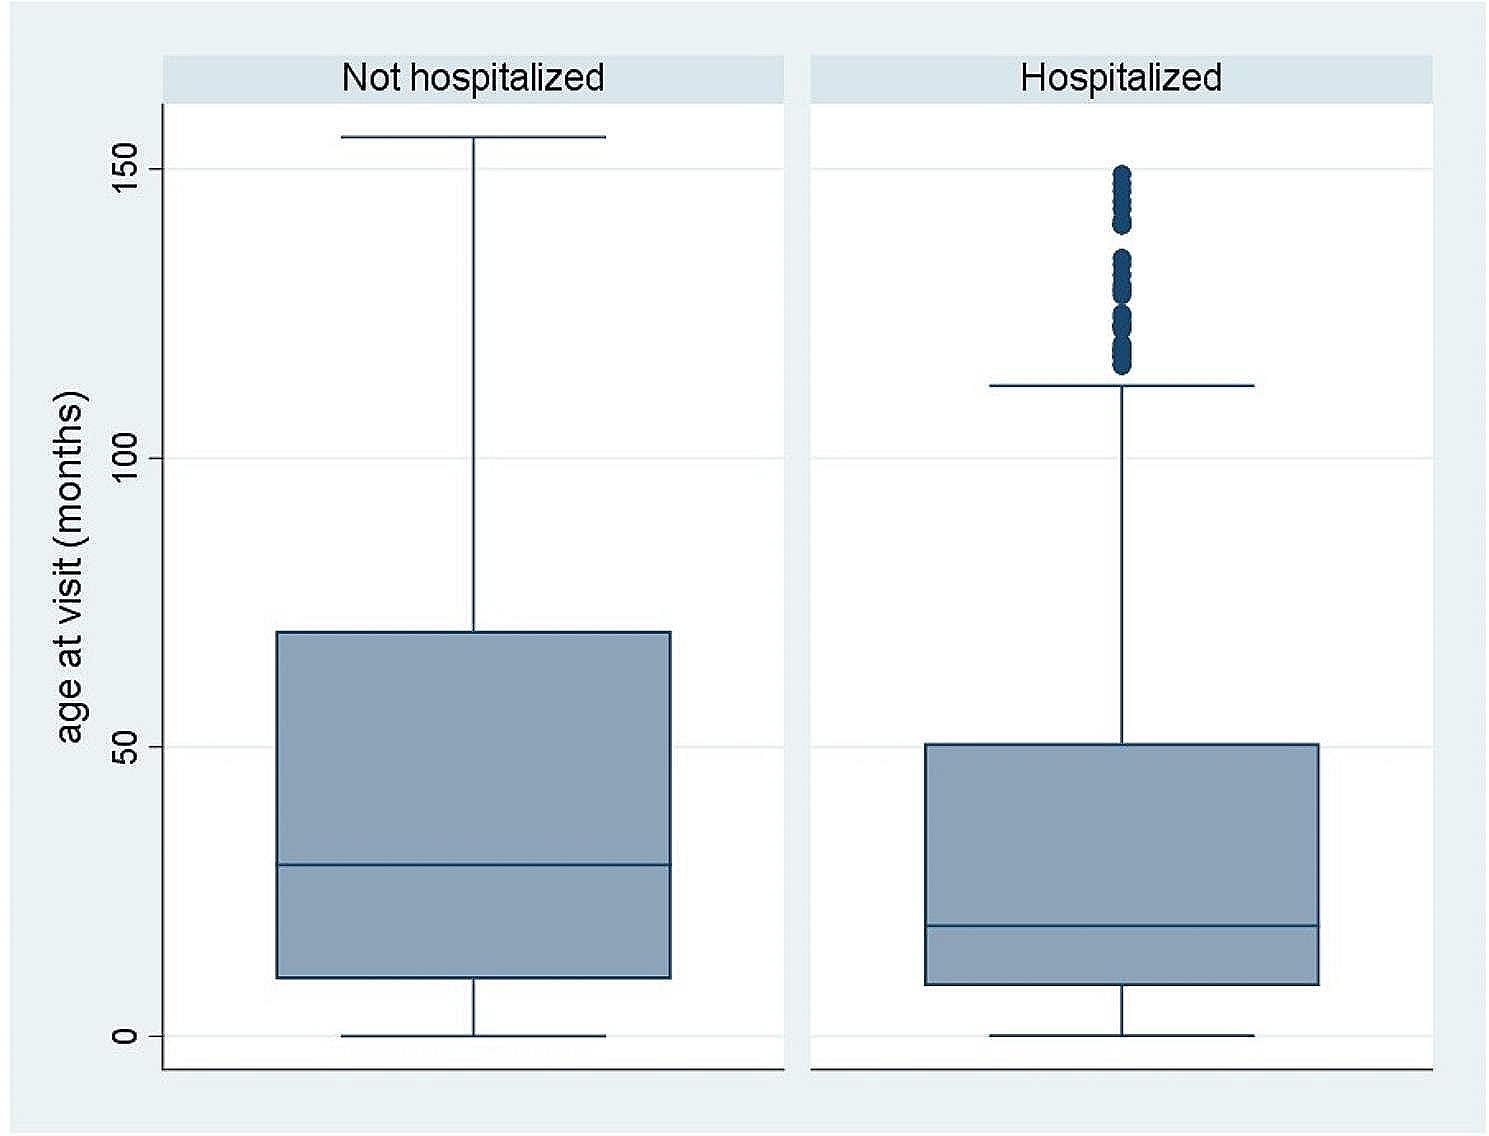 Factors associated with hospitalization in a pediatric population of rural Tanzania: findings from a retrospective cohort study